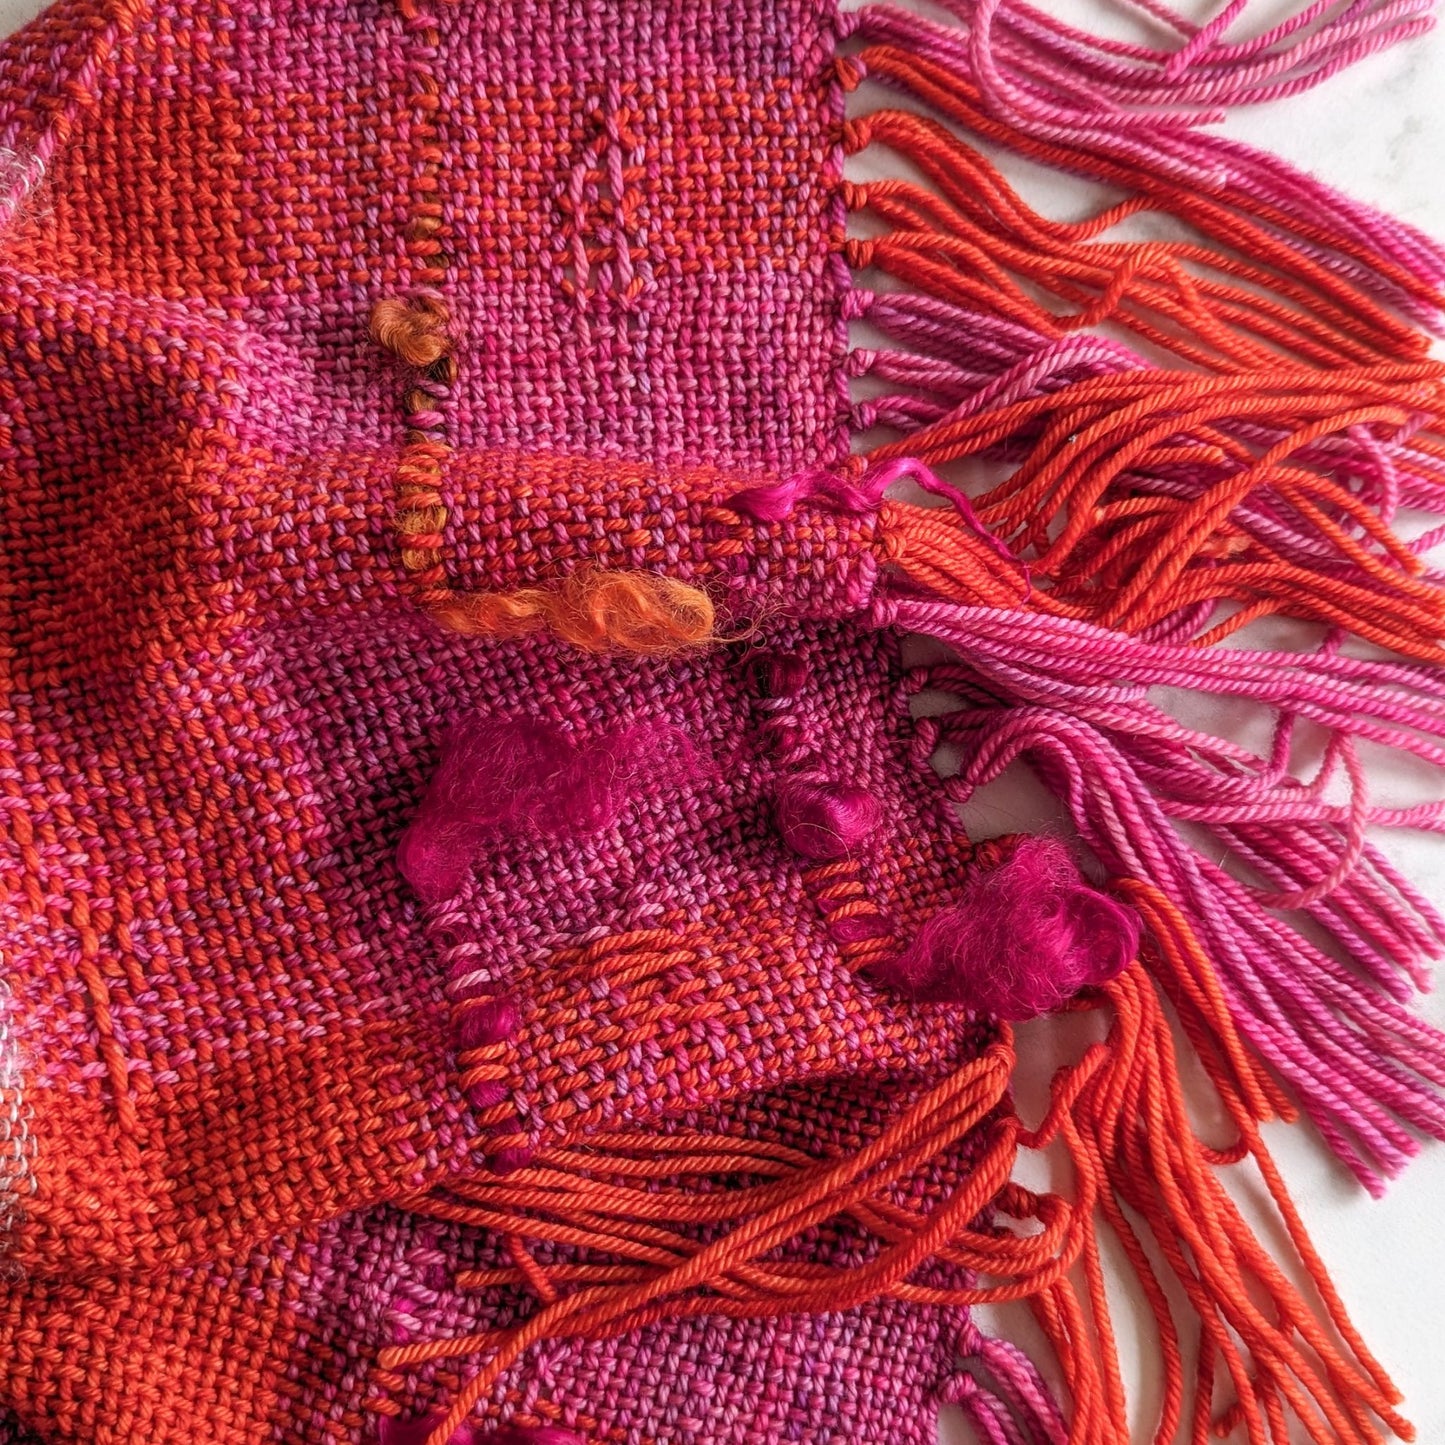 On Wednesday's We Wear Pink! - ART Scarf